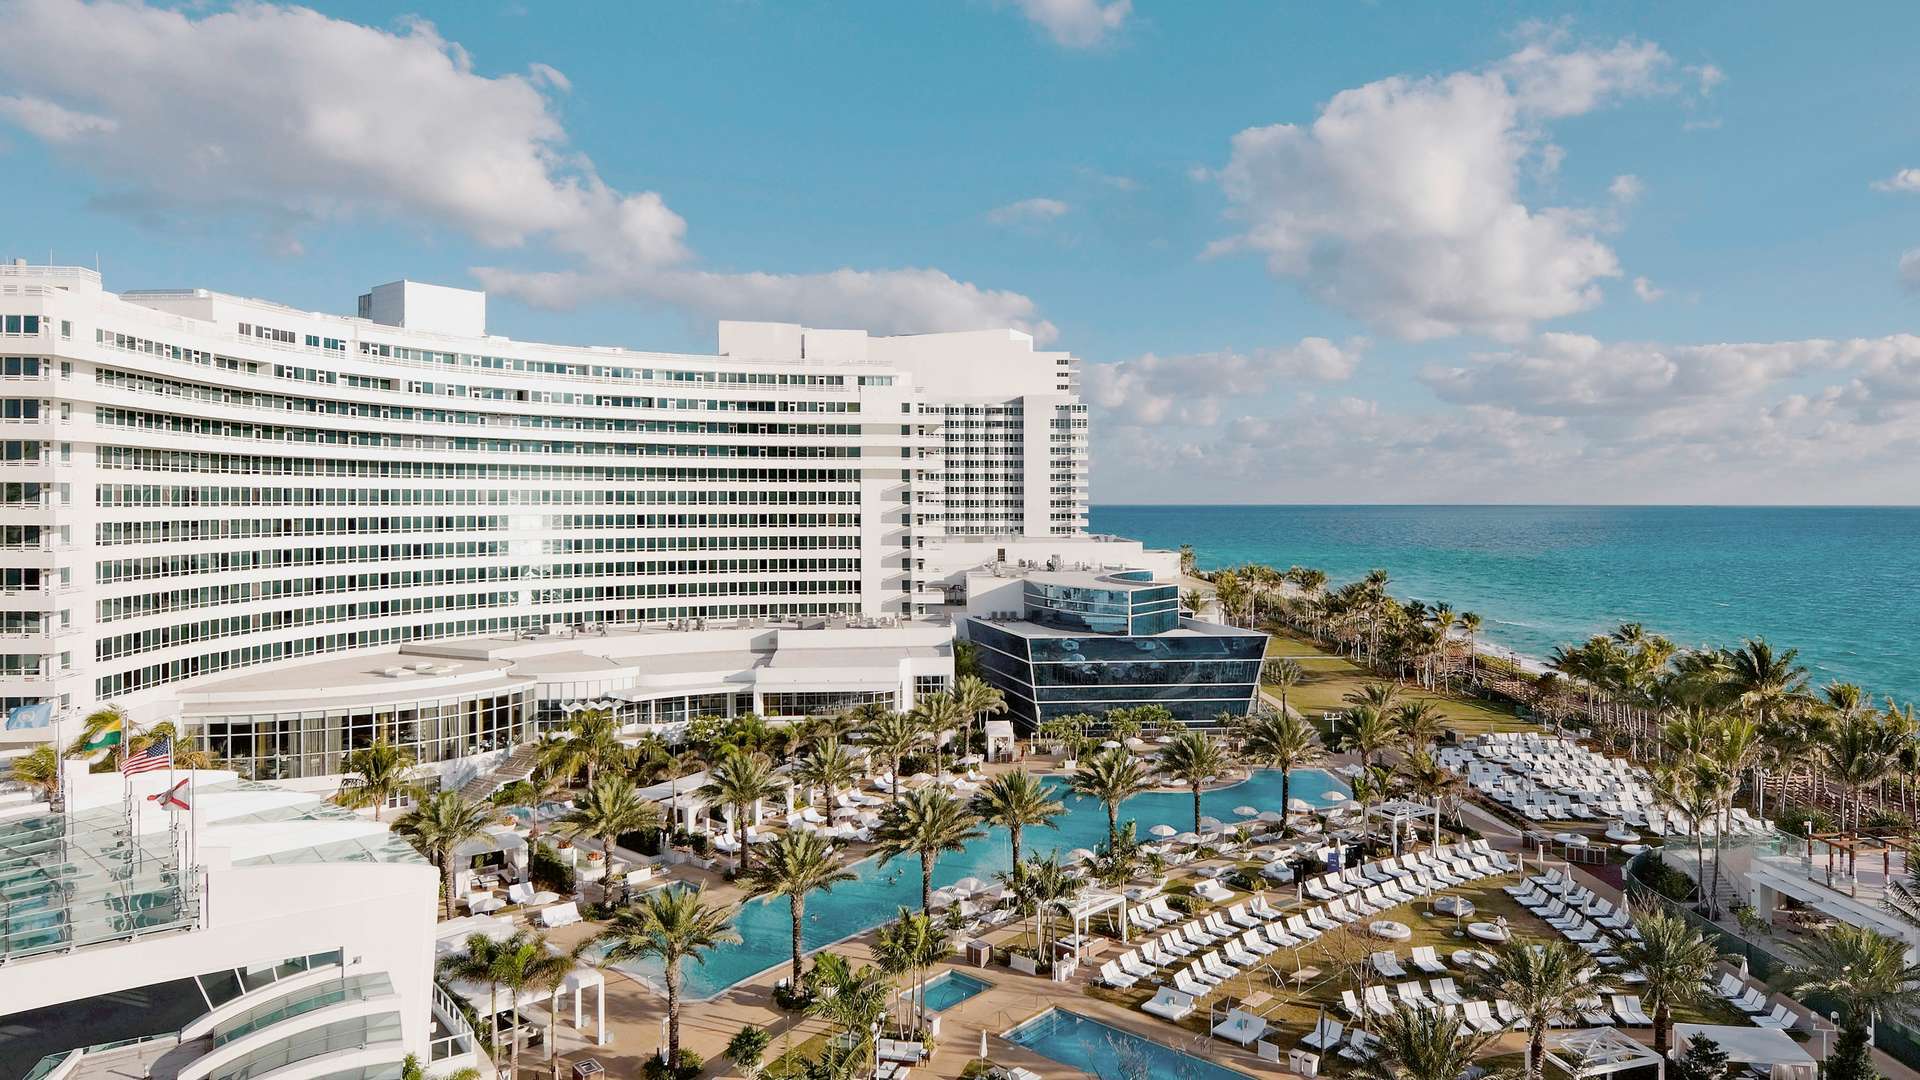 The Hotel Architecture of the Fontainebleau Miami Beach - ADG Lighting